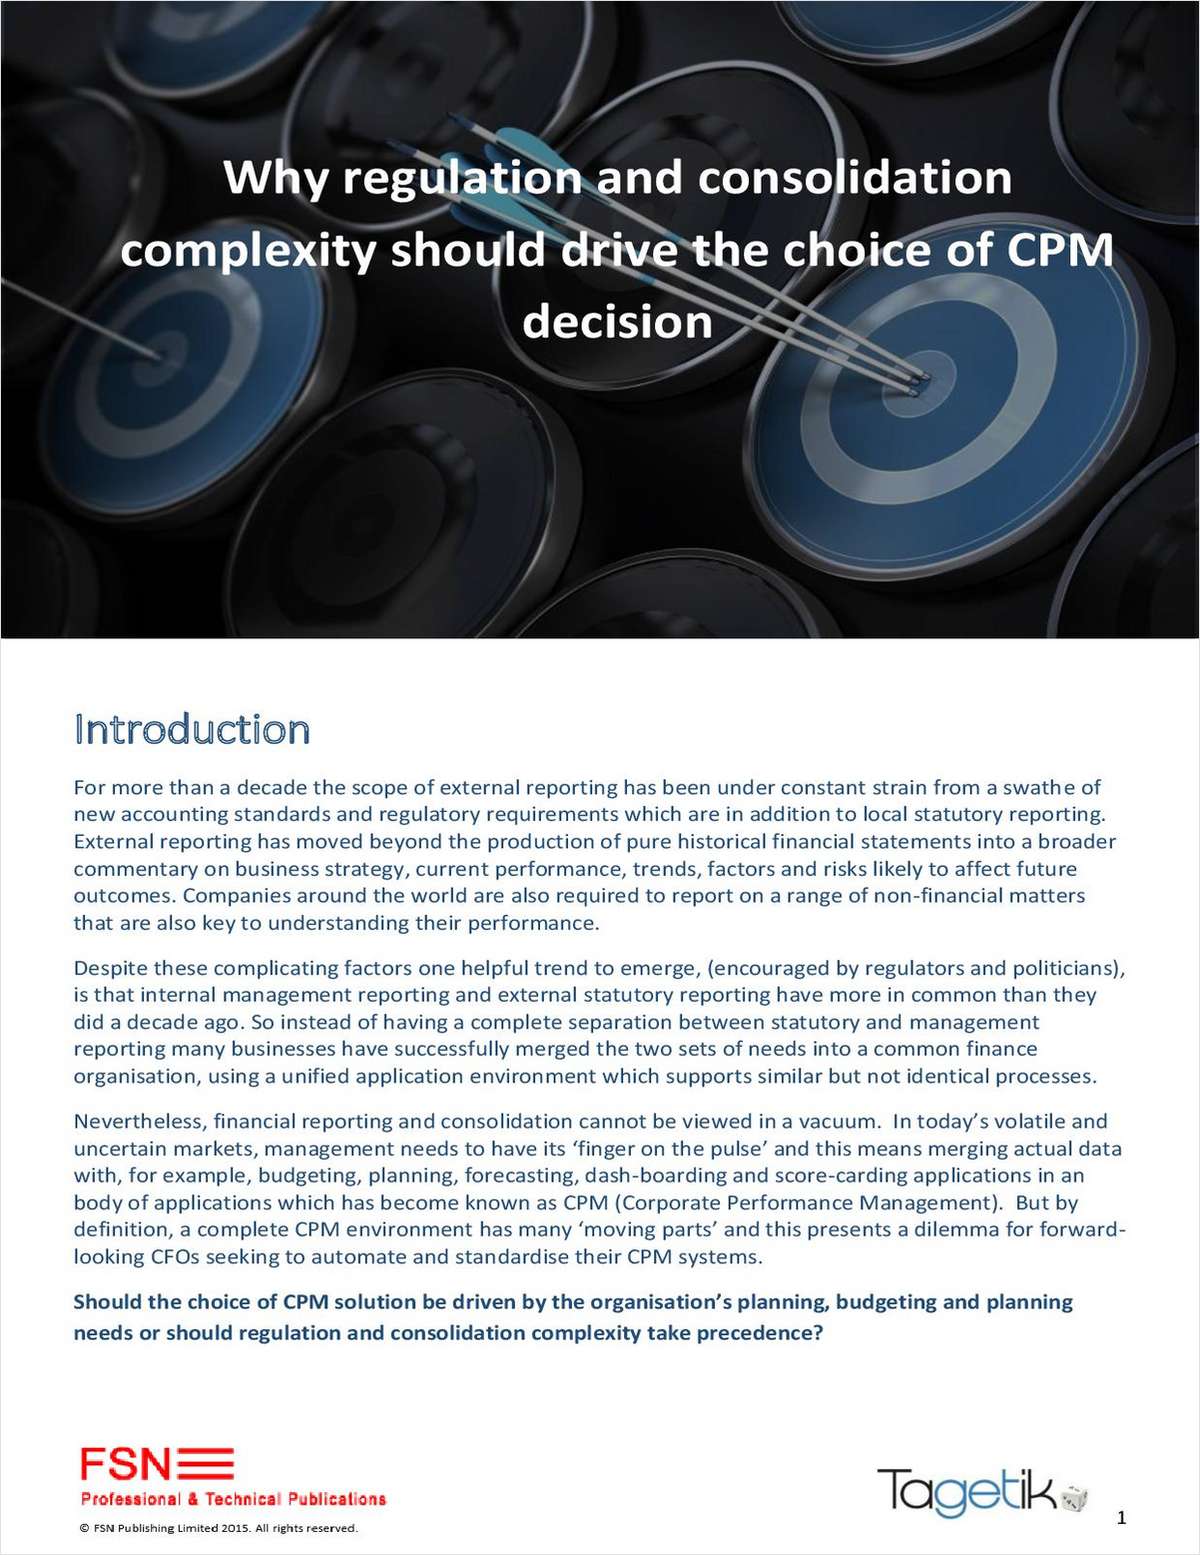 Why Regulation and Consolidation Complexity Should Drive the Choice of CPM Decision